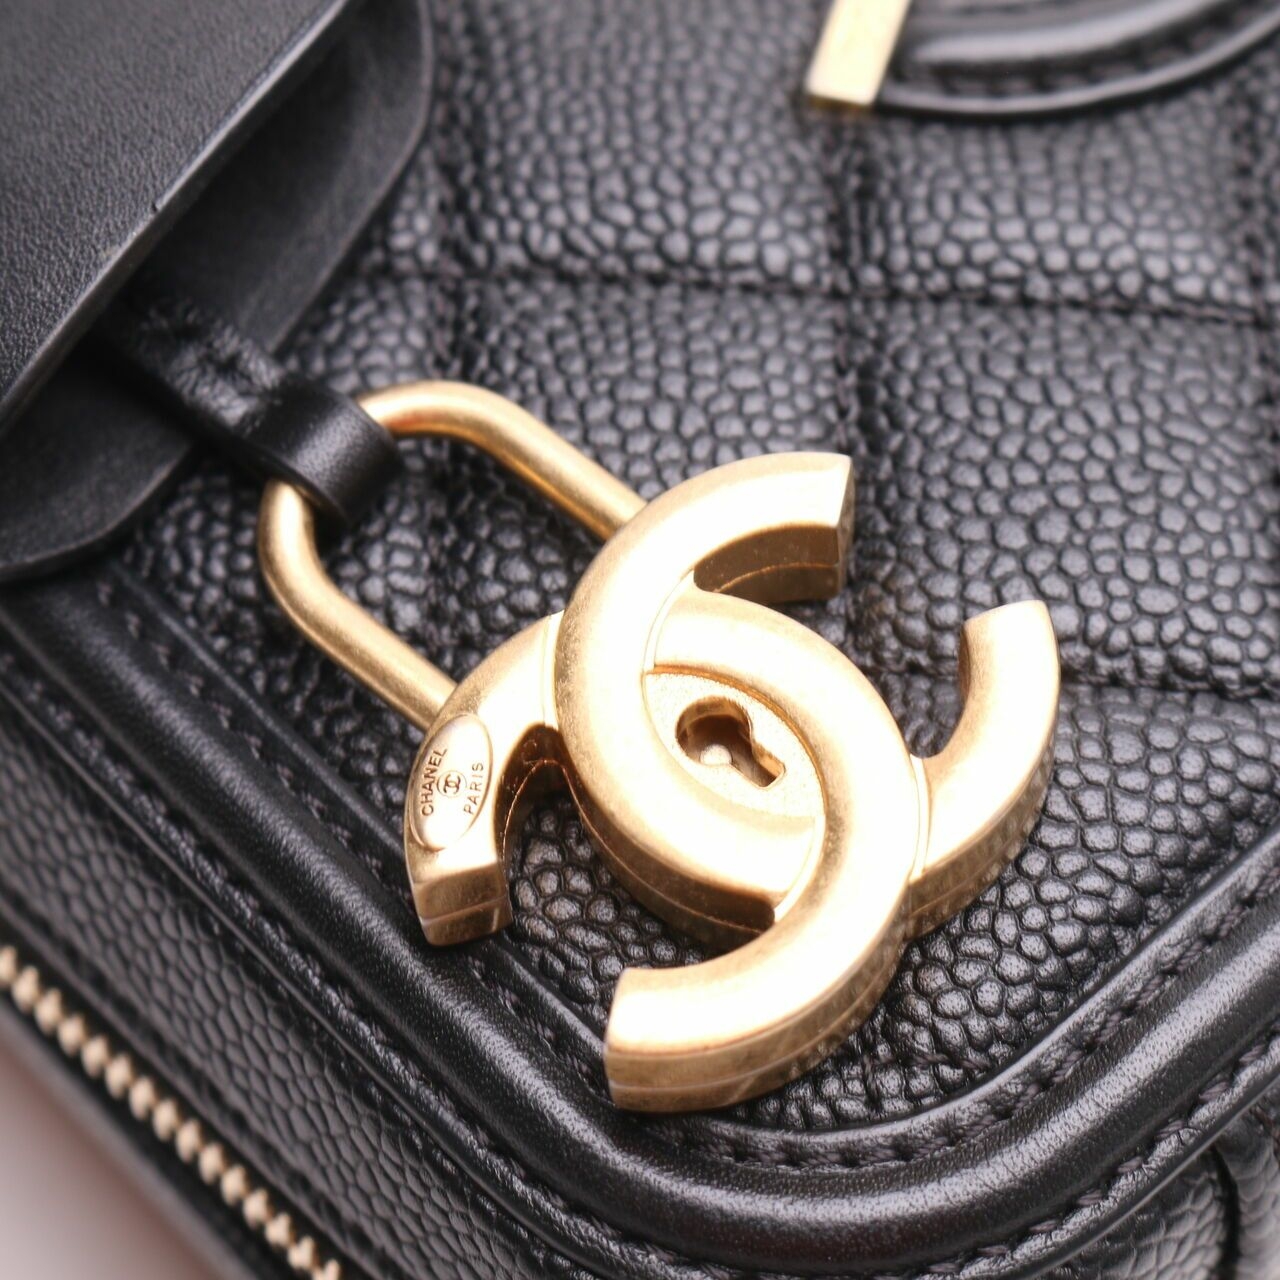 Chanel Filigree Vanity Case Quilted Caviar Gold-tone Small Black Satchel Bag